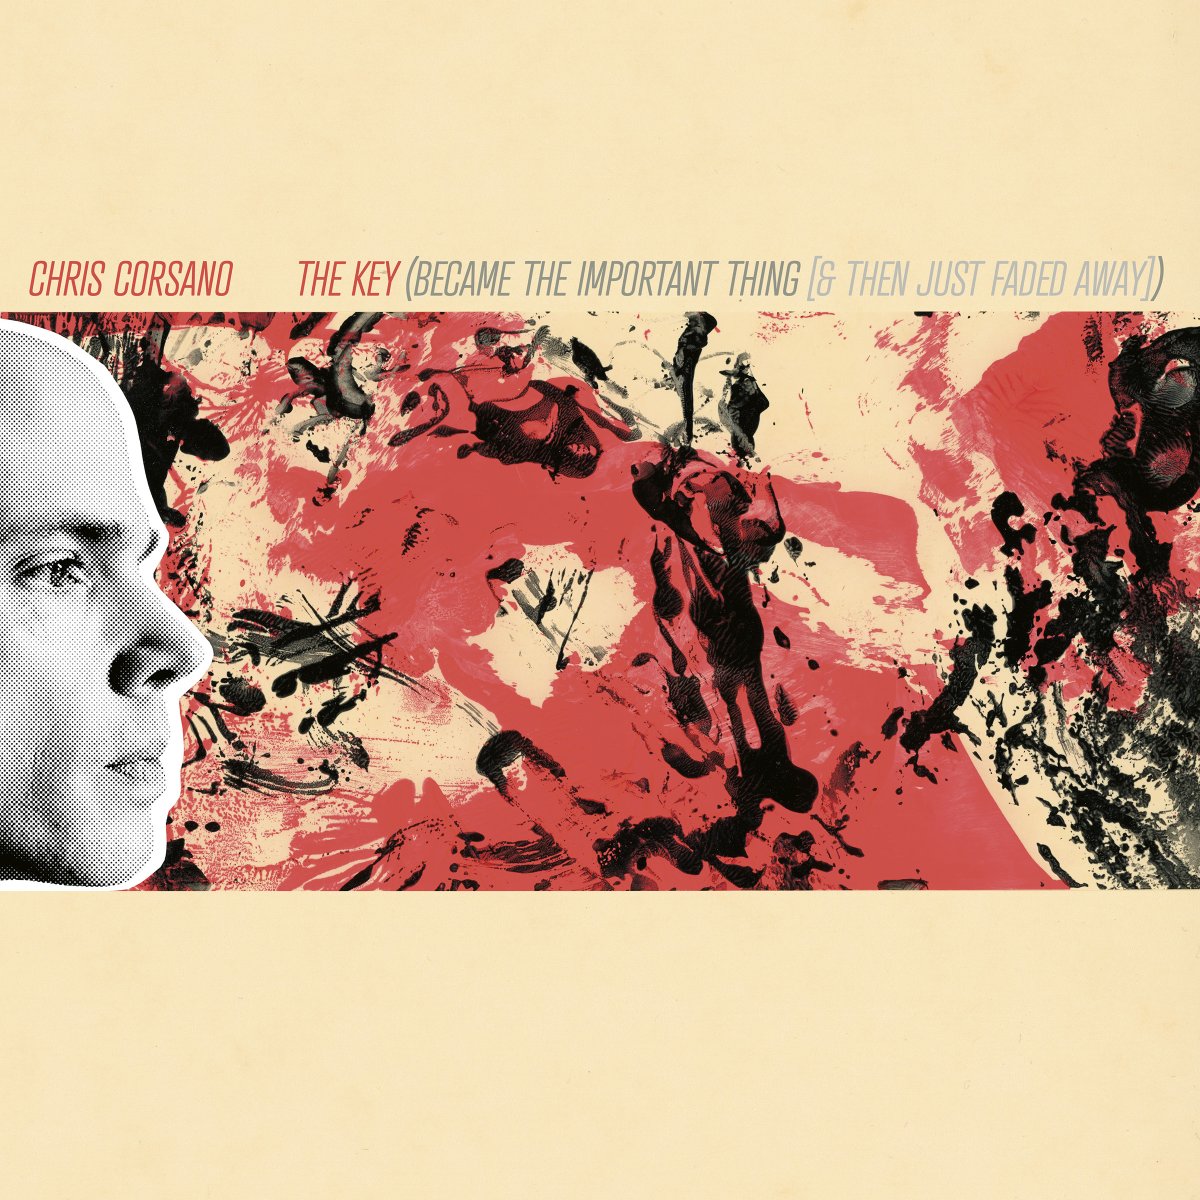 A feverish essay of transcendent drumming, Chris Corsano’s ambitious new record, The Key (Became The Important Thing [& Then Just Faded Away]), brings his focus on free improvisation and noise into a granular fusion. Listen and pre-order: lnk.to/thekeyfadedaway Out June 28th!